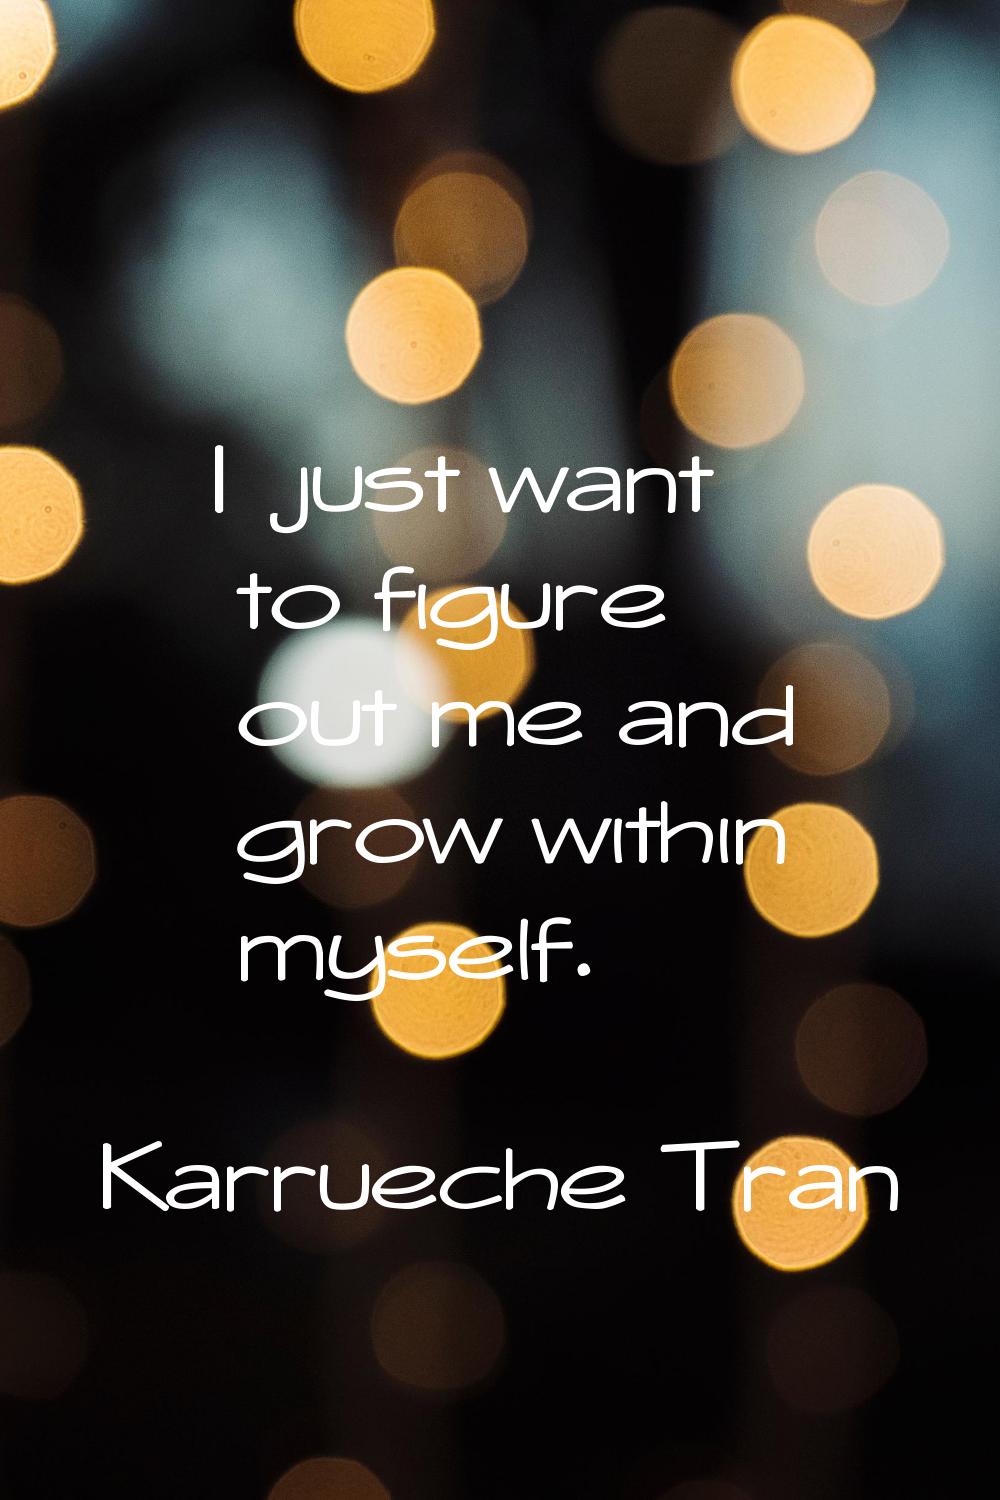 I just want to figure out me and grow within myself.